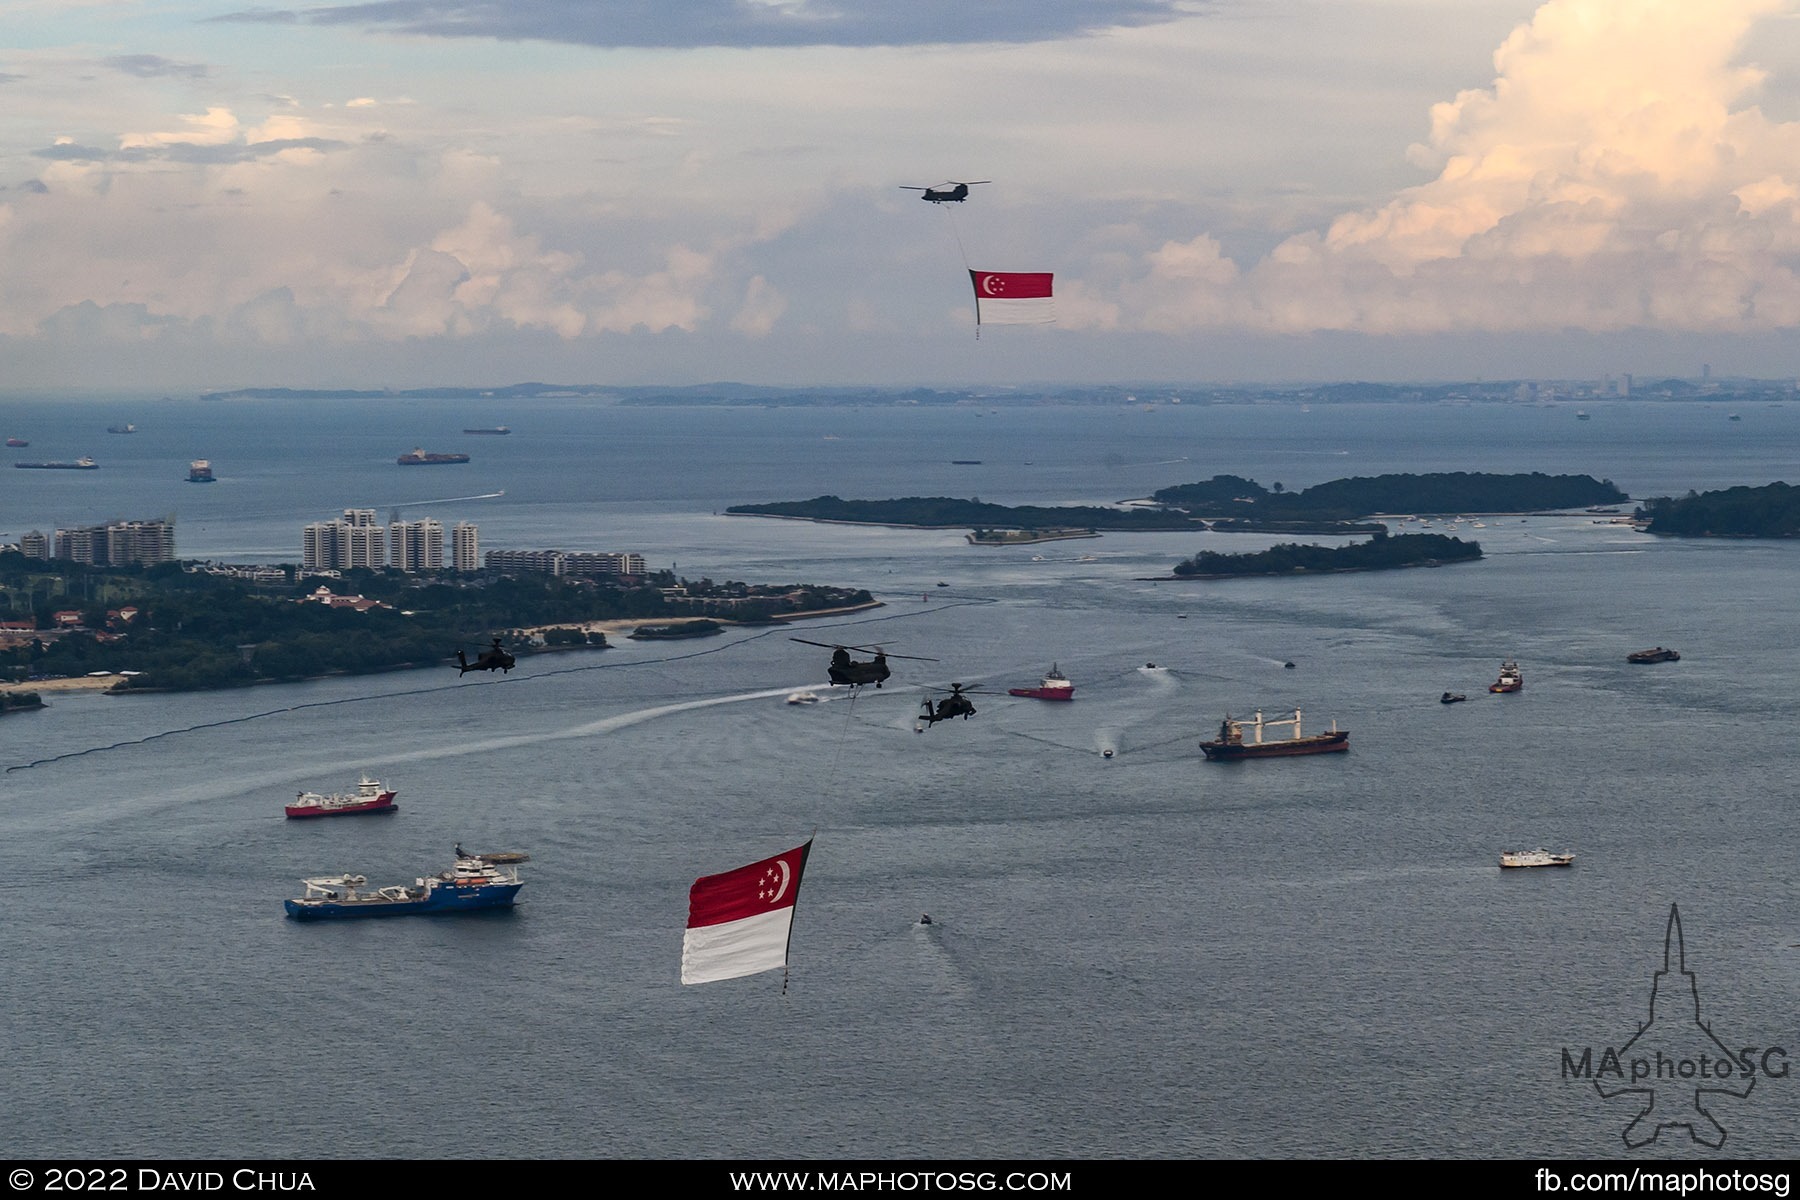 Two Chinook helicopters with state flags holding in the south of Singapore